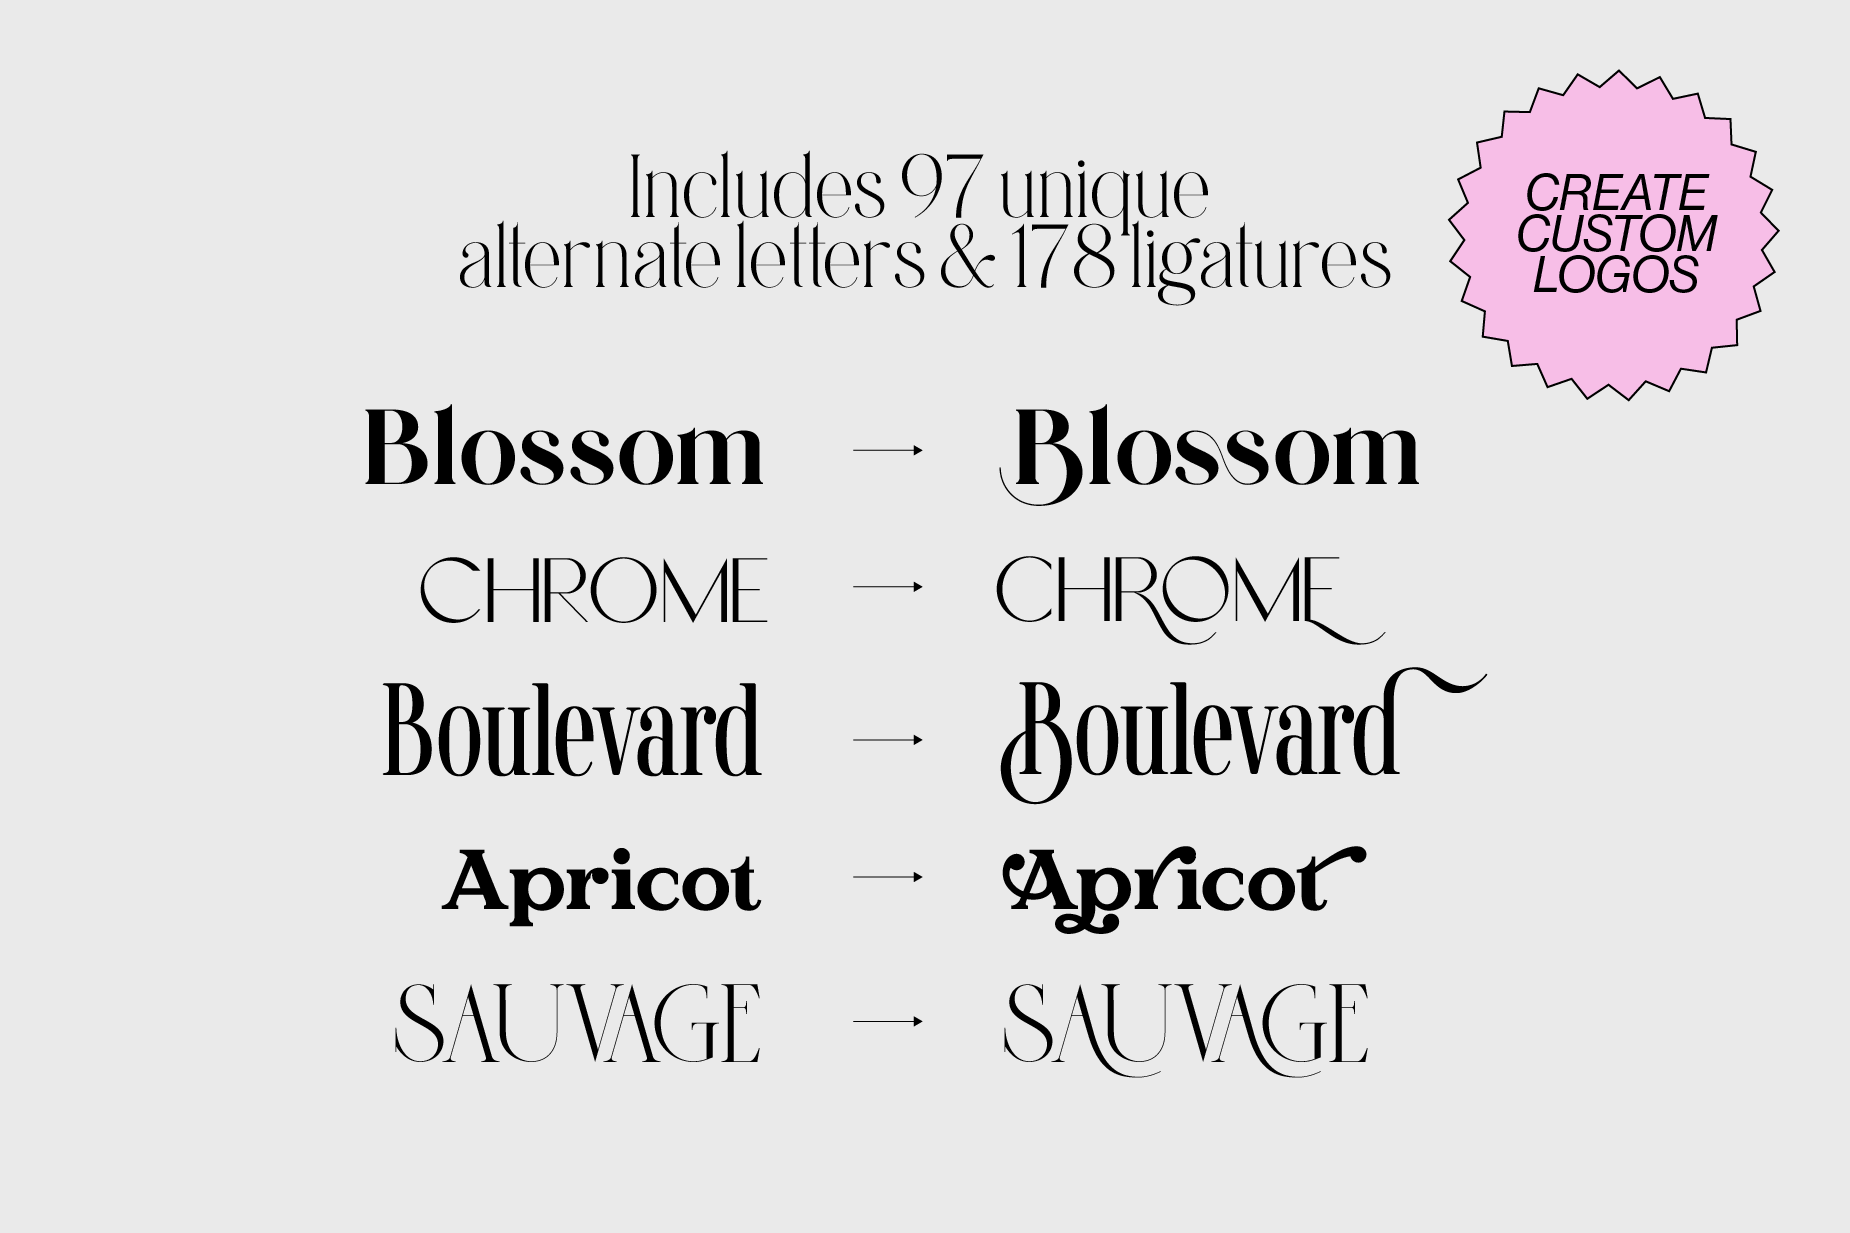 Create free custom logos with the Classic Font Bundle; use ligatures and alternate letters with swashes to create your unique logo design